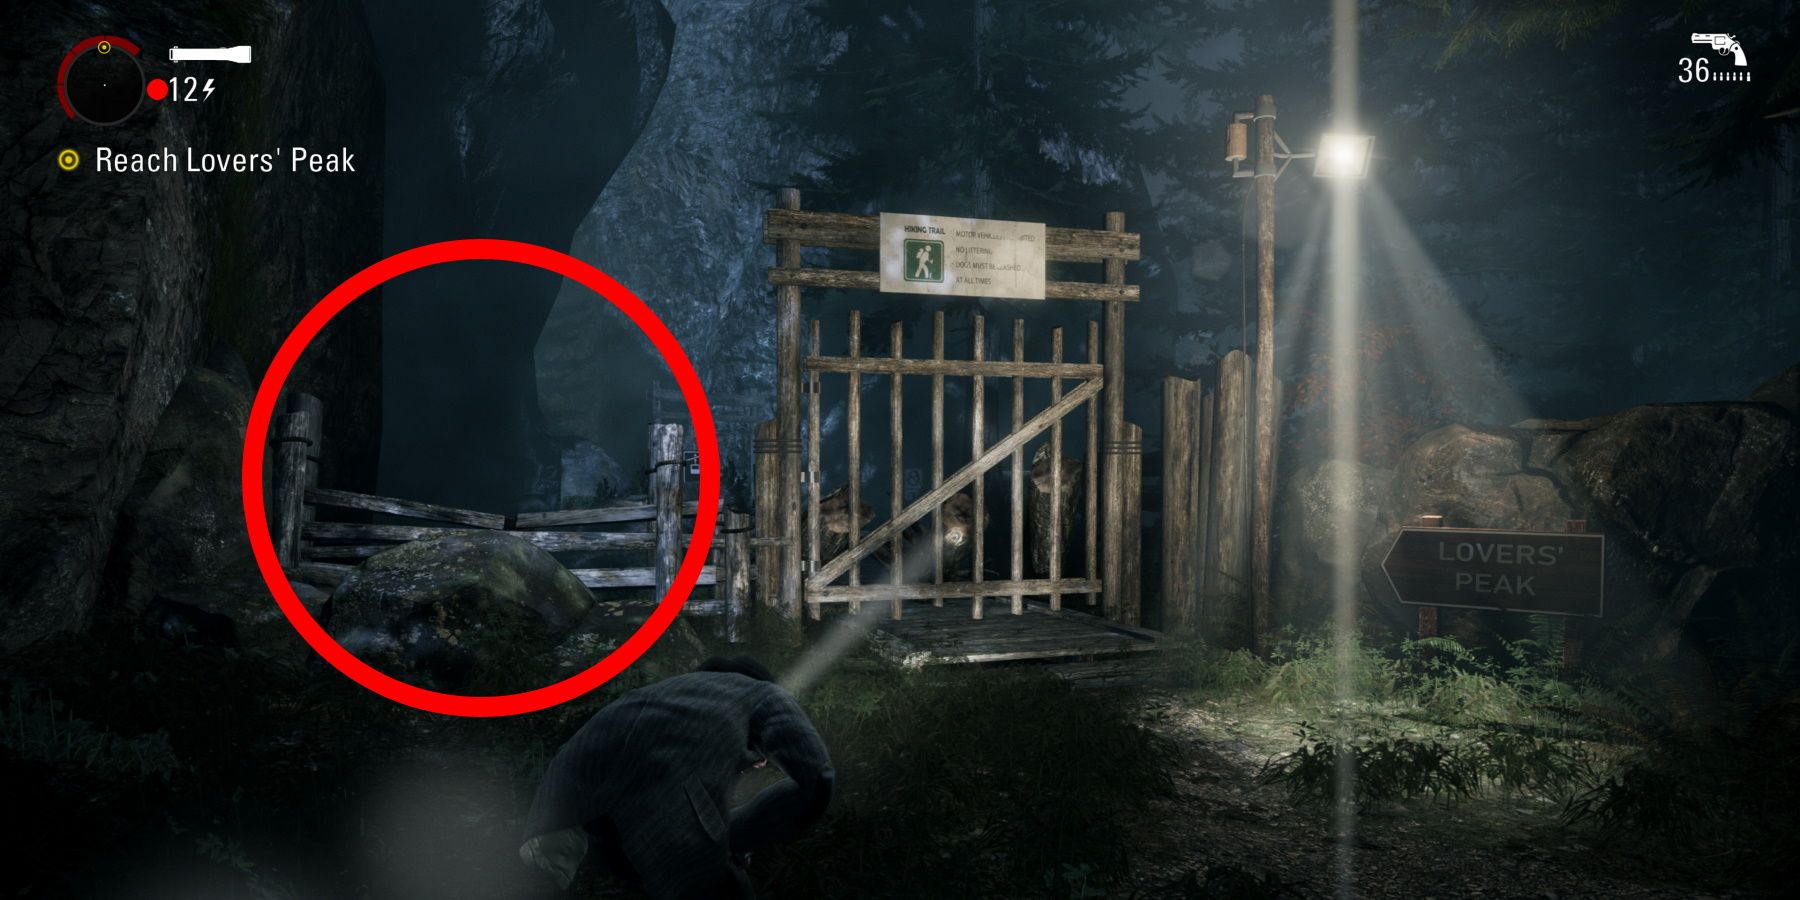 alan wake remastered corcled entrance to lovers peak in episode 2